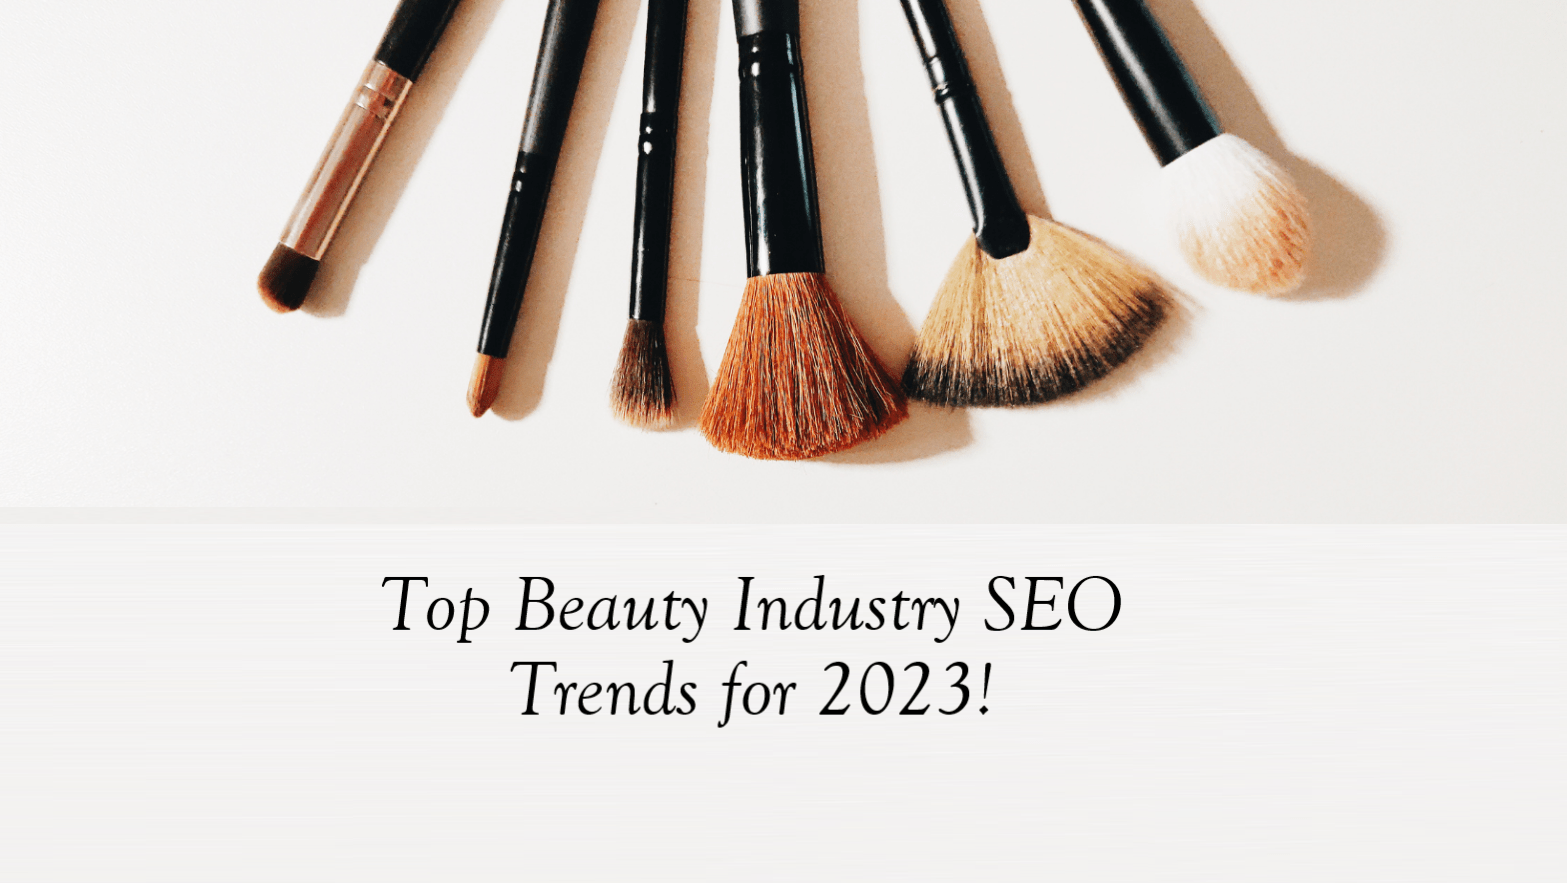 Top Beauty Industry SEO Trends for 2023